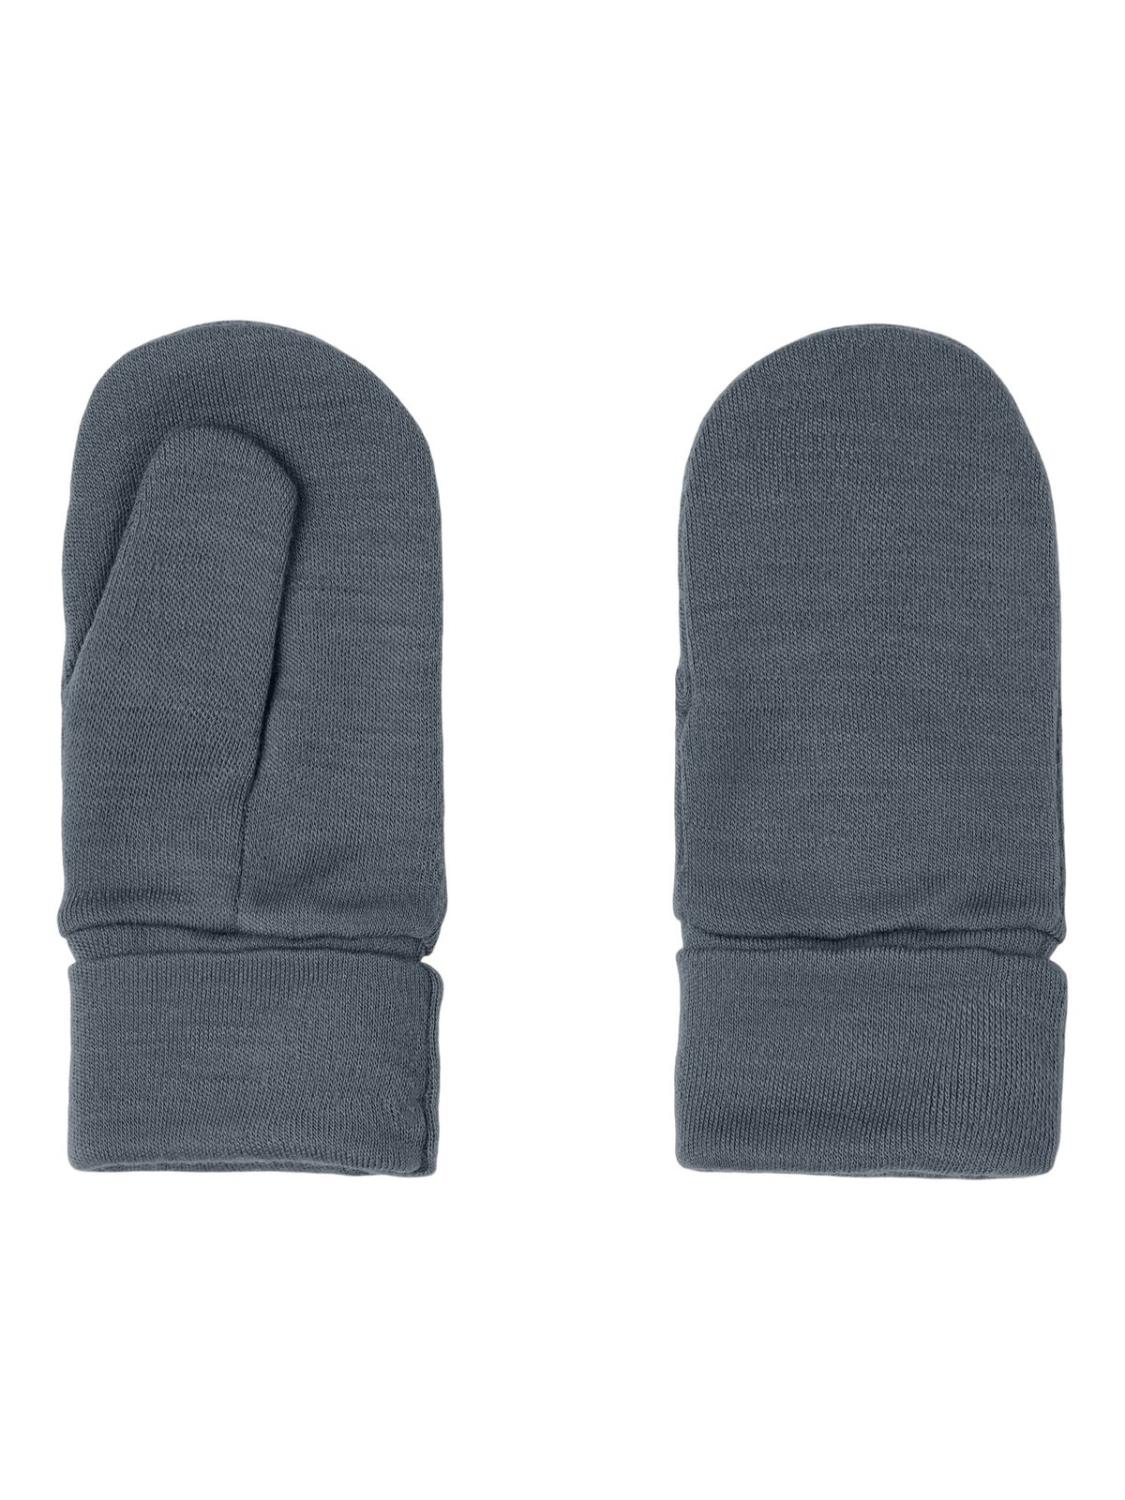 Willit Wool Mittens med tommel - Turbulence